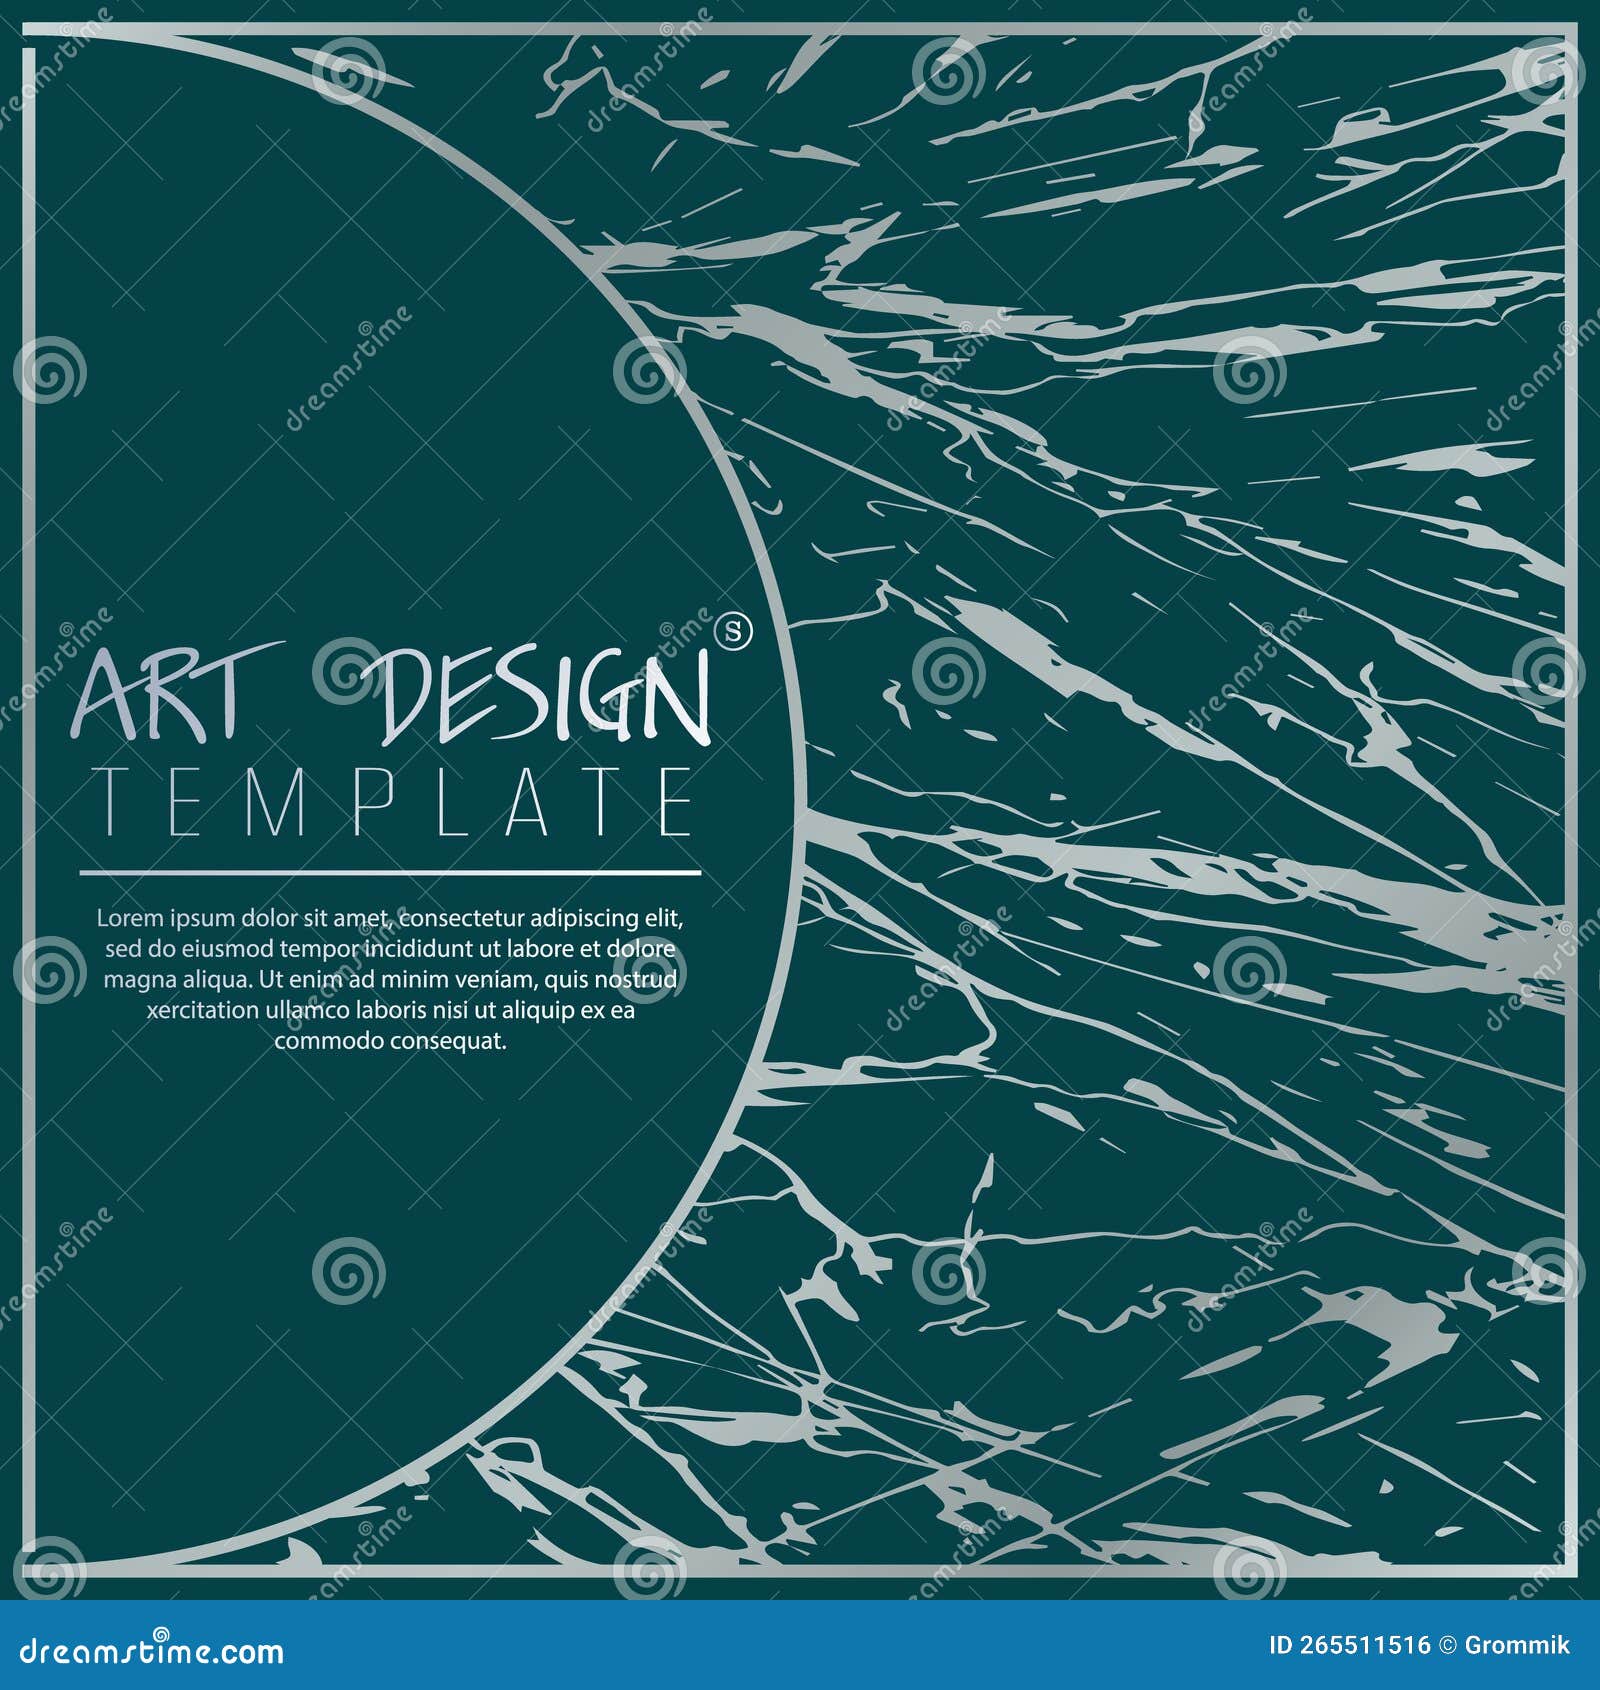 Art Design. the Layout of a Luxury Product Packaging Design, Cover, Poster,  Banner, Brochure, Poster Stock Vector - Illustration of ornament,  presentation: 265511516